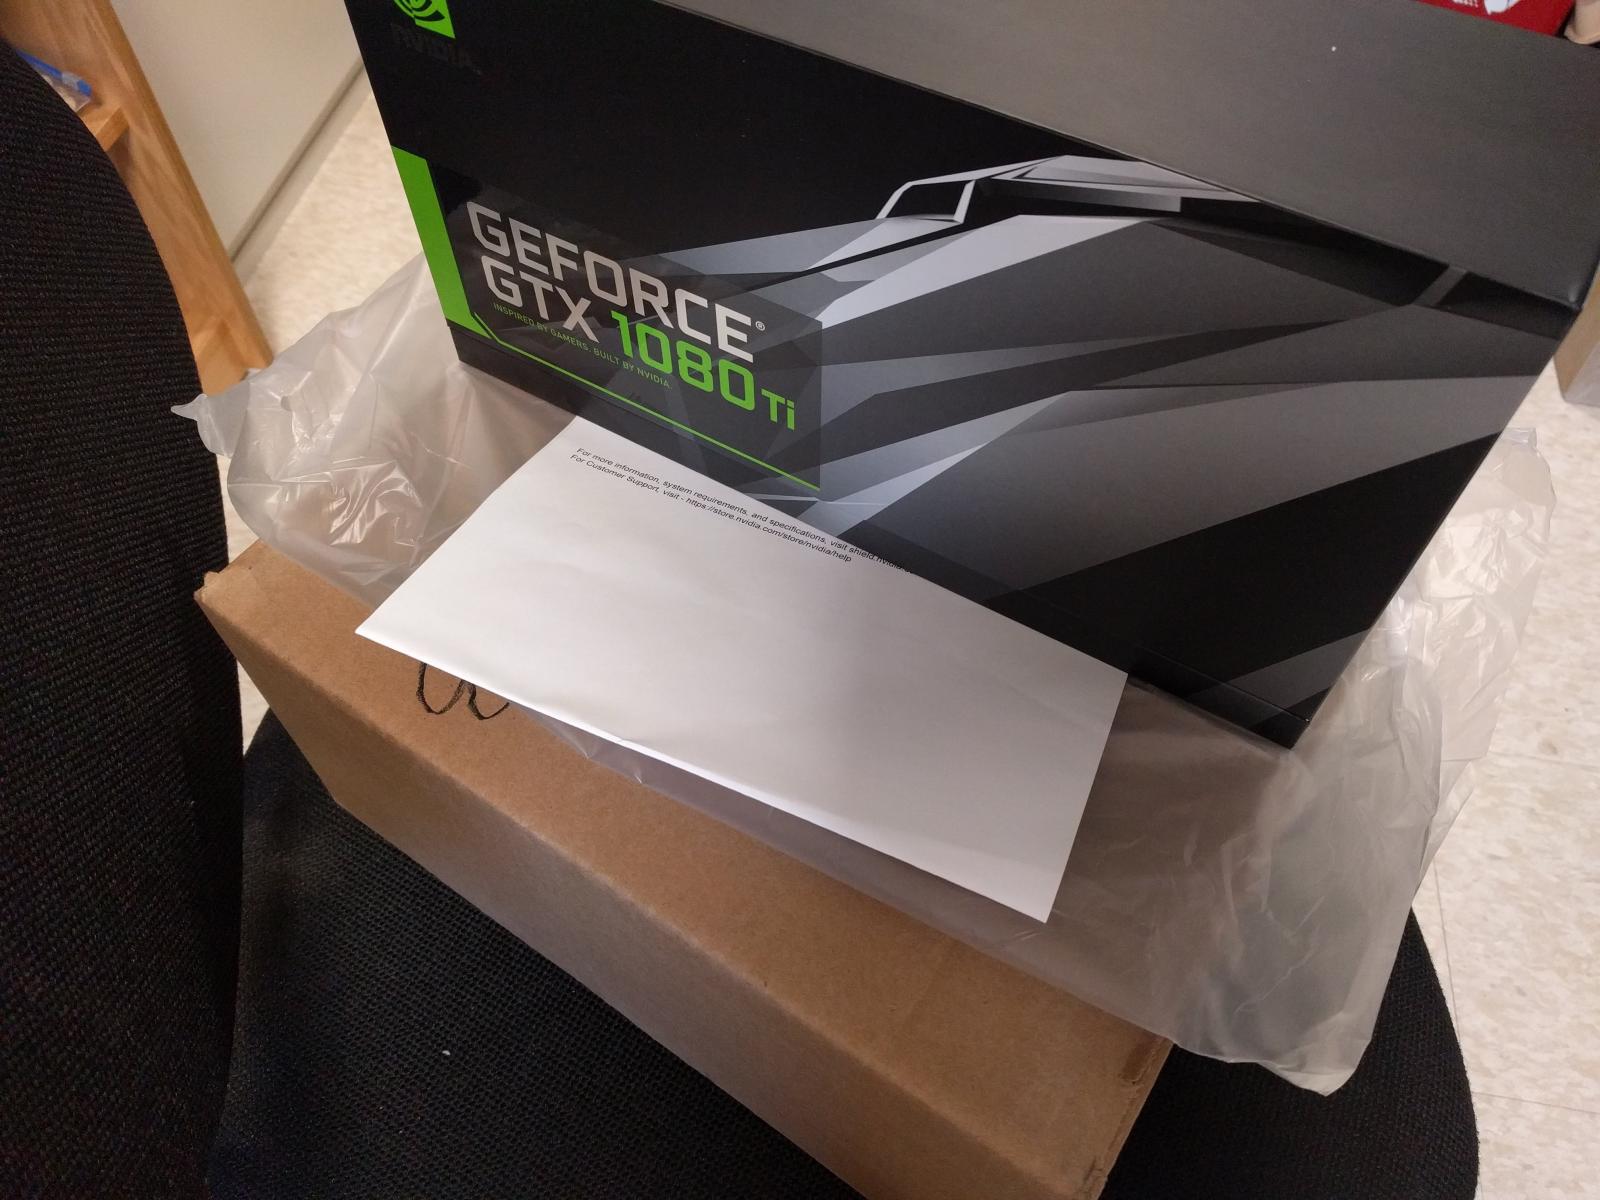 For sale Nvidia GTX 1080 Ti - FE Founder's Edition NEVER OPENED, BRAND NEW, Priority Ship